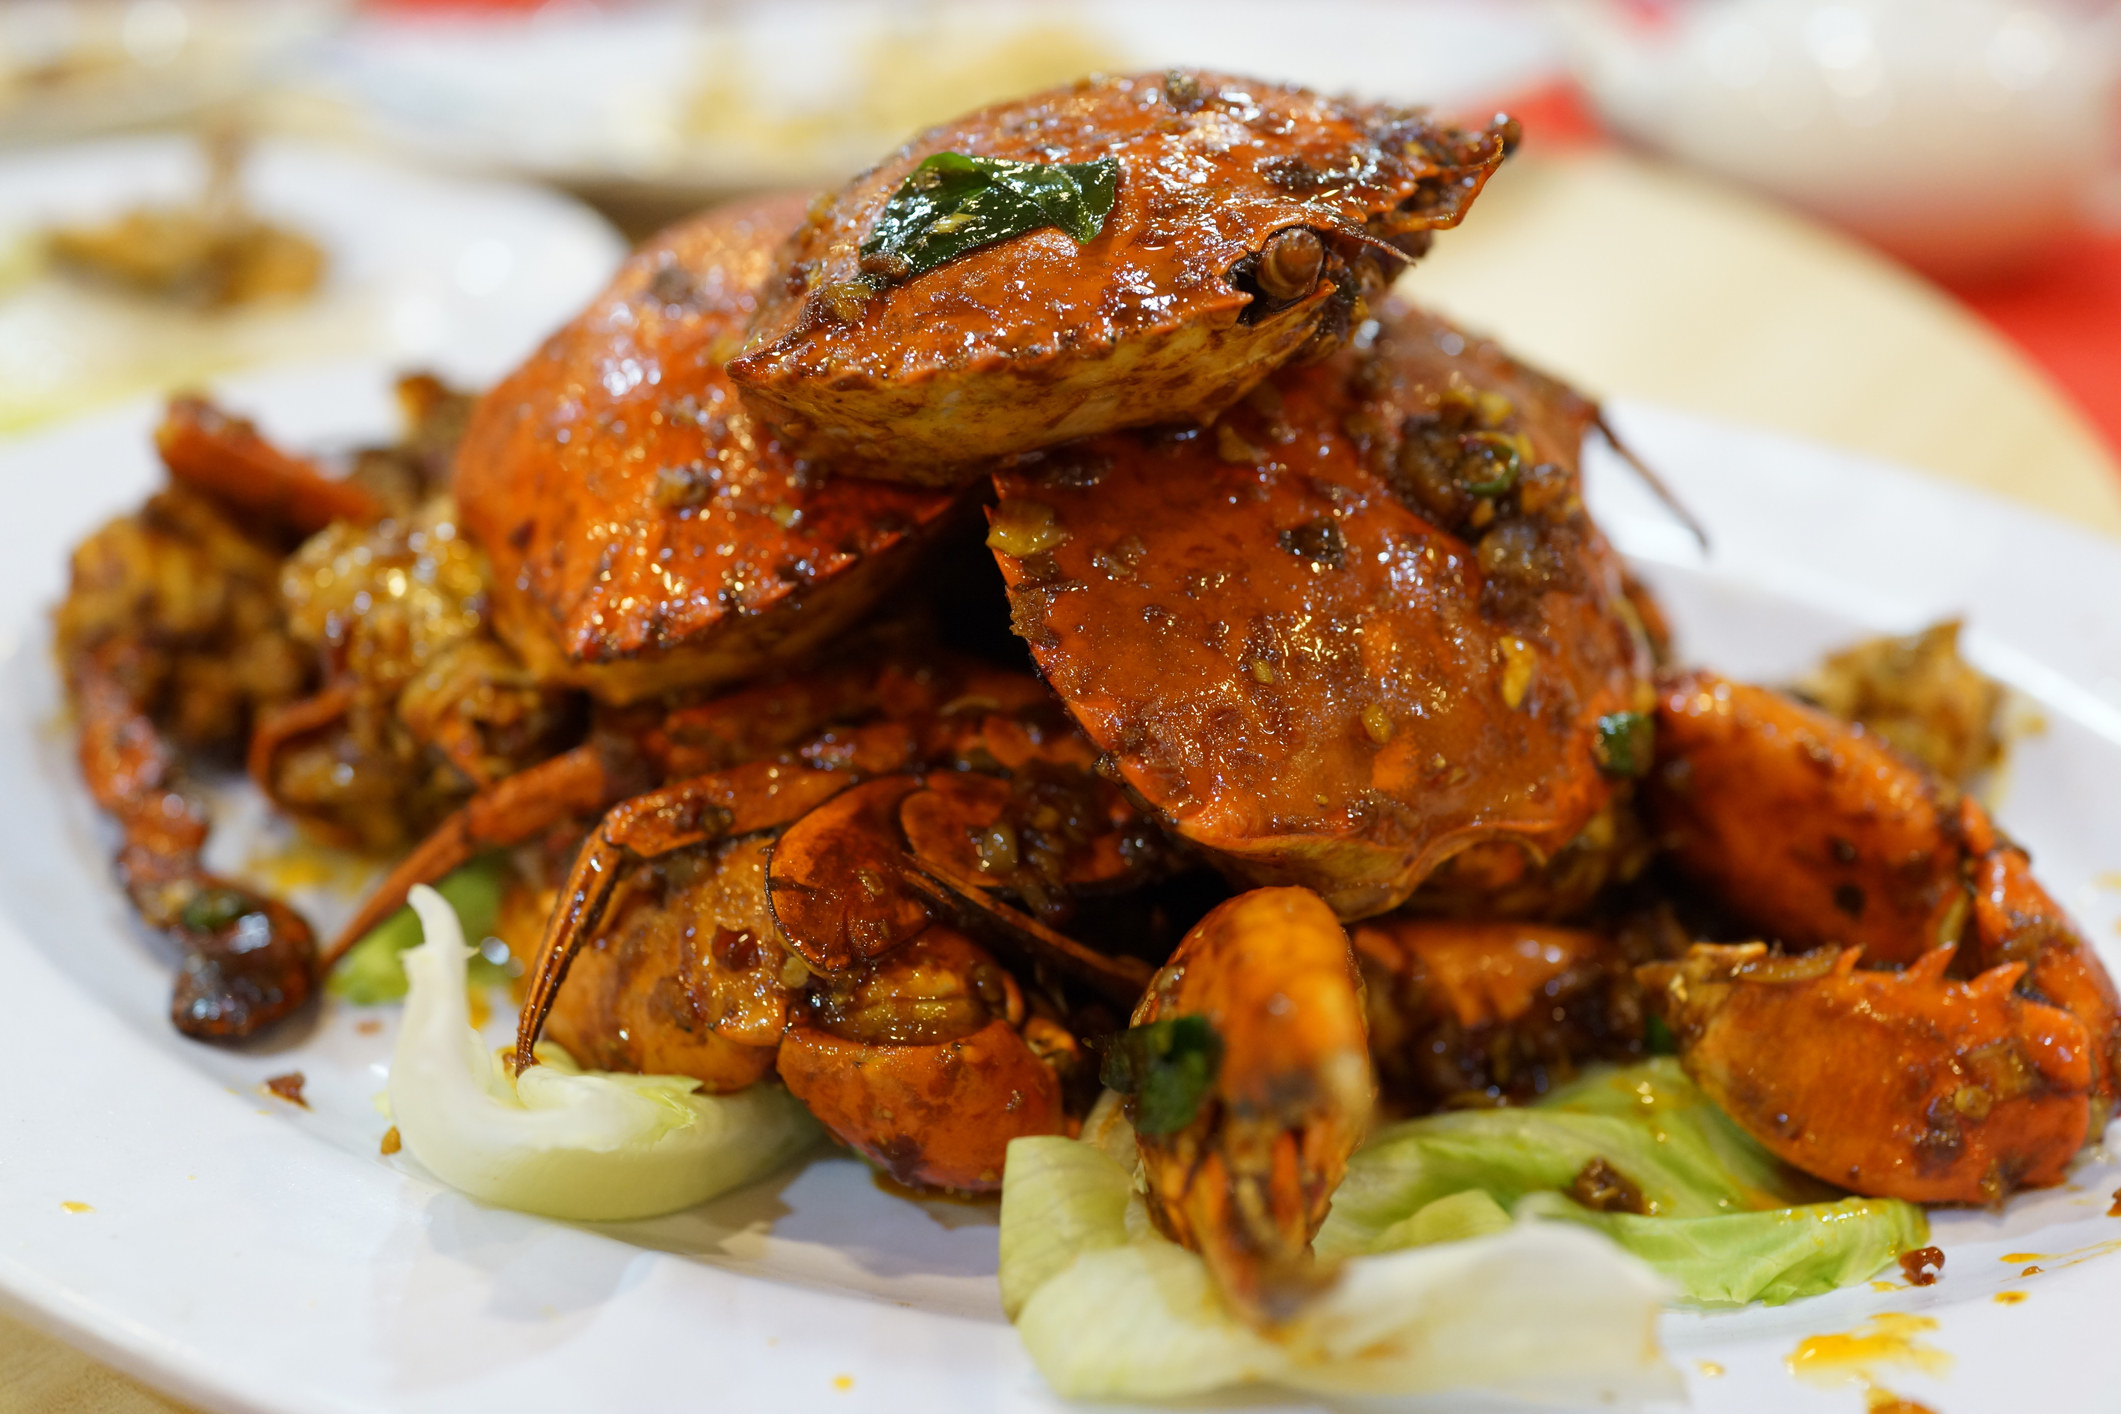 Black pepper crab on a plate.